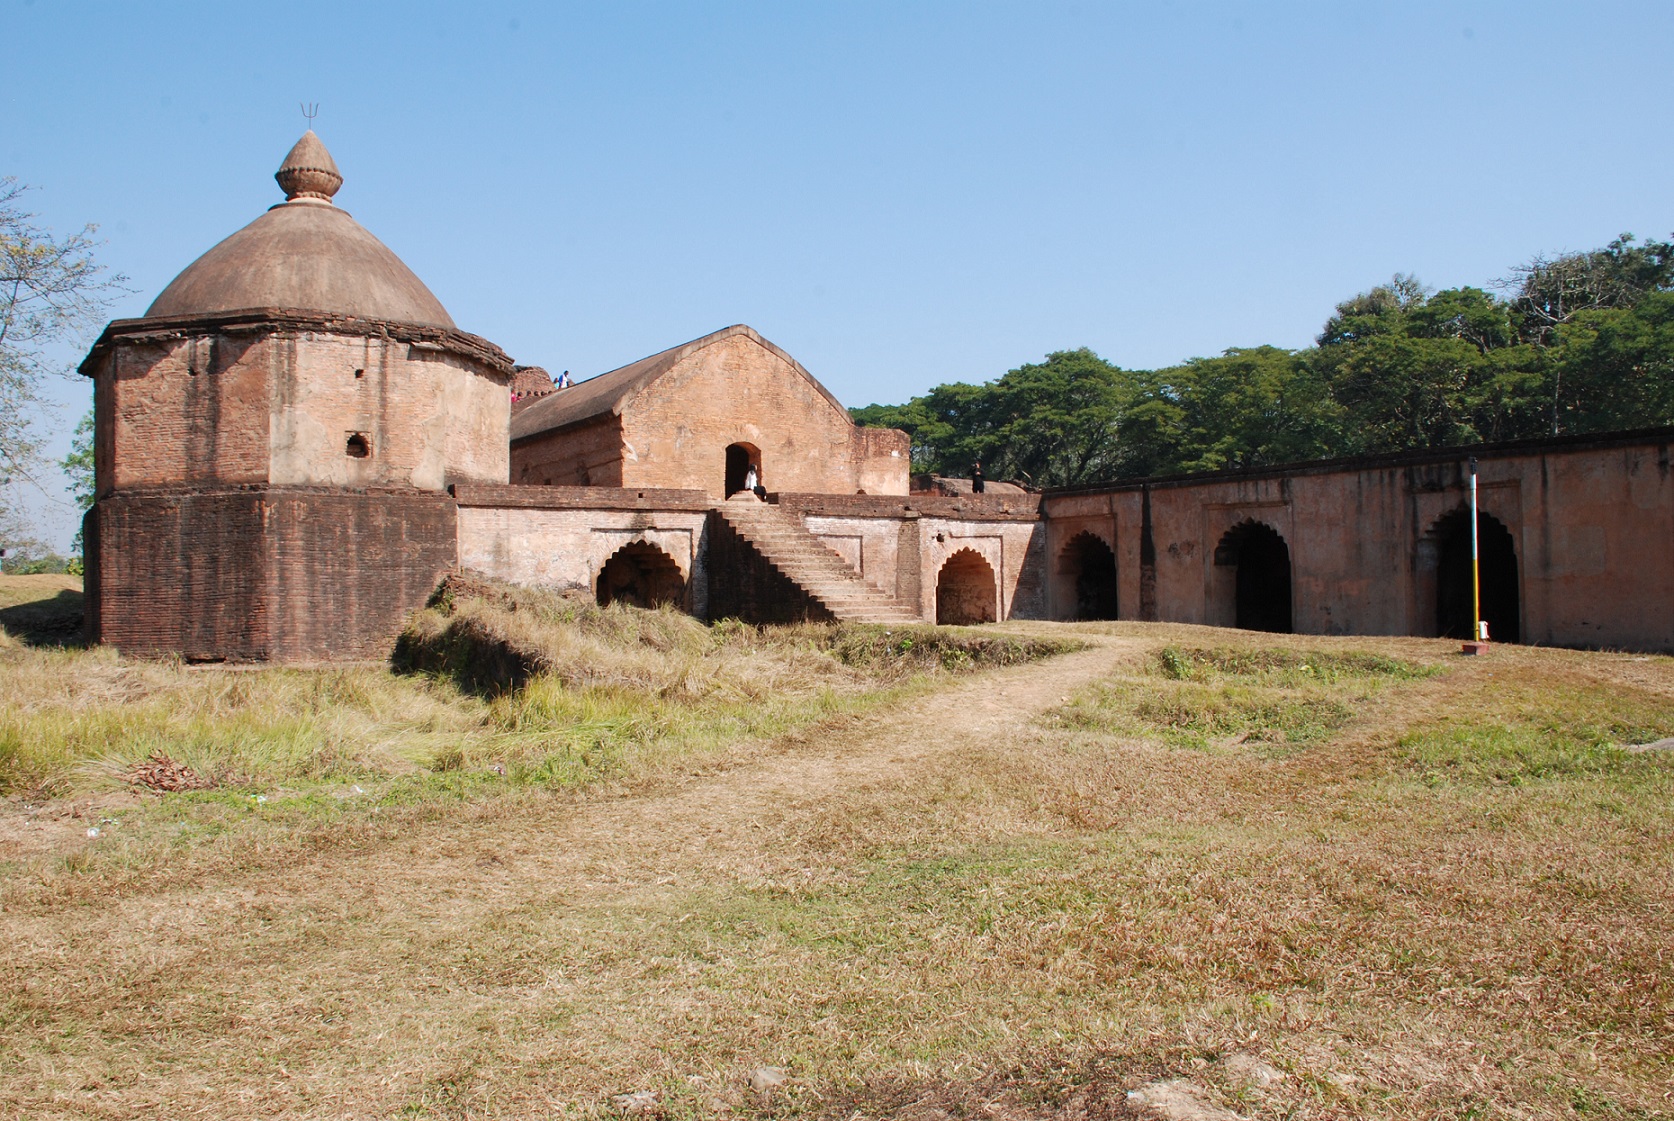 South-West View of the Talatal Ghar. Image Source: Archaeological Survey of India